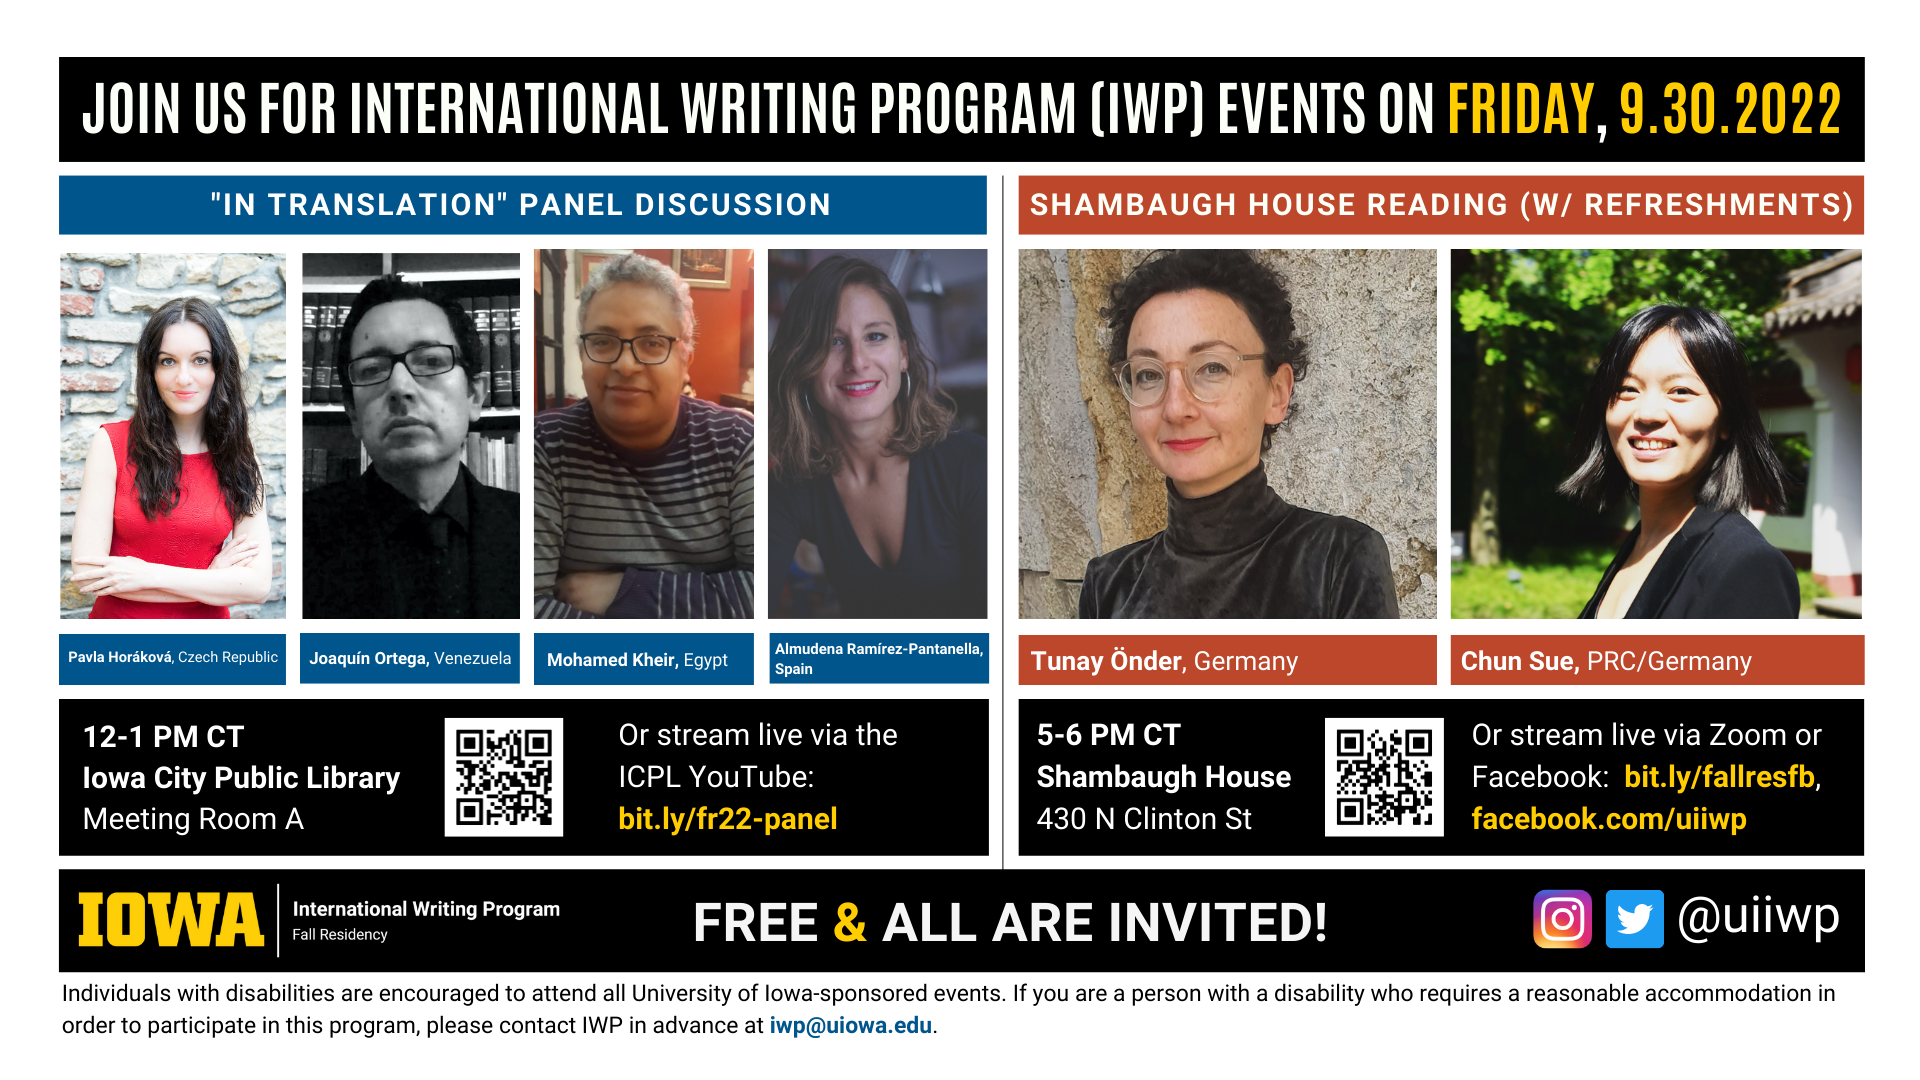 Friday, 9/30 Image: An image with two halves, each advertising one event. The image as a whole is labeled “Join us for International Writing Program (IWP) events on Friday, 9.30.2022.” The left half of the image is labeled, “’In Translation’ Library Panel Discussion.” There are portraits of four writers (named below) and the following text: "Pavla Horáková, Czech Republic. Juoaquin Ortega, Venezuela. Mohamed Kheir, Egypt. Almudena Ramirez Pantanella, Spain. 12-1 PM CT, UI Main Library, Main Library Gallery." The right half of the image is labeled “Shambaugh House Reading w/ refreshments. It features portraits of two writers (named below) and the following text: "Tunay Önder, Germany. Chun Sue, PRC/Germany. 5-6 PM CT, Shambaugh House, 430 N. Clinton St. Or stream live via Zoom or Facebook:  bit.ly/fallresfb, facebook.com/uiiwp.” Below that text there are the IWP Fall Residency logo, the Instagram and Twitter handle @uiiwp, and a note that the event is “Free & All Are Invited.” The following text is at the bottom of the image: "Individuals with disabilities are encouraged to attend all University of Iowa-sponsored events. If you are a person with a disability who requires a reasonable accommodation in order to participate in this program, please contact IWP in advance at iwp@uiowa.edu.”